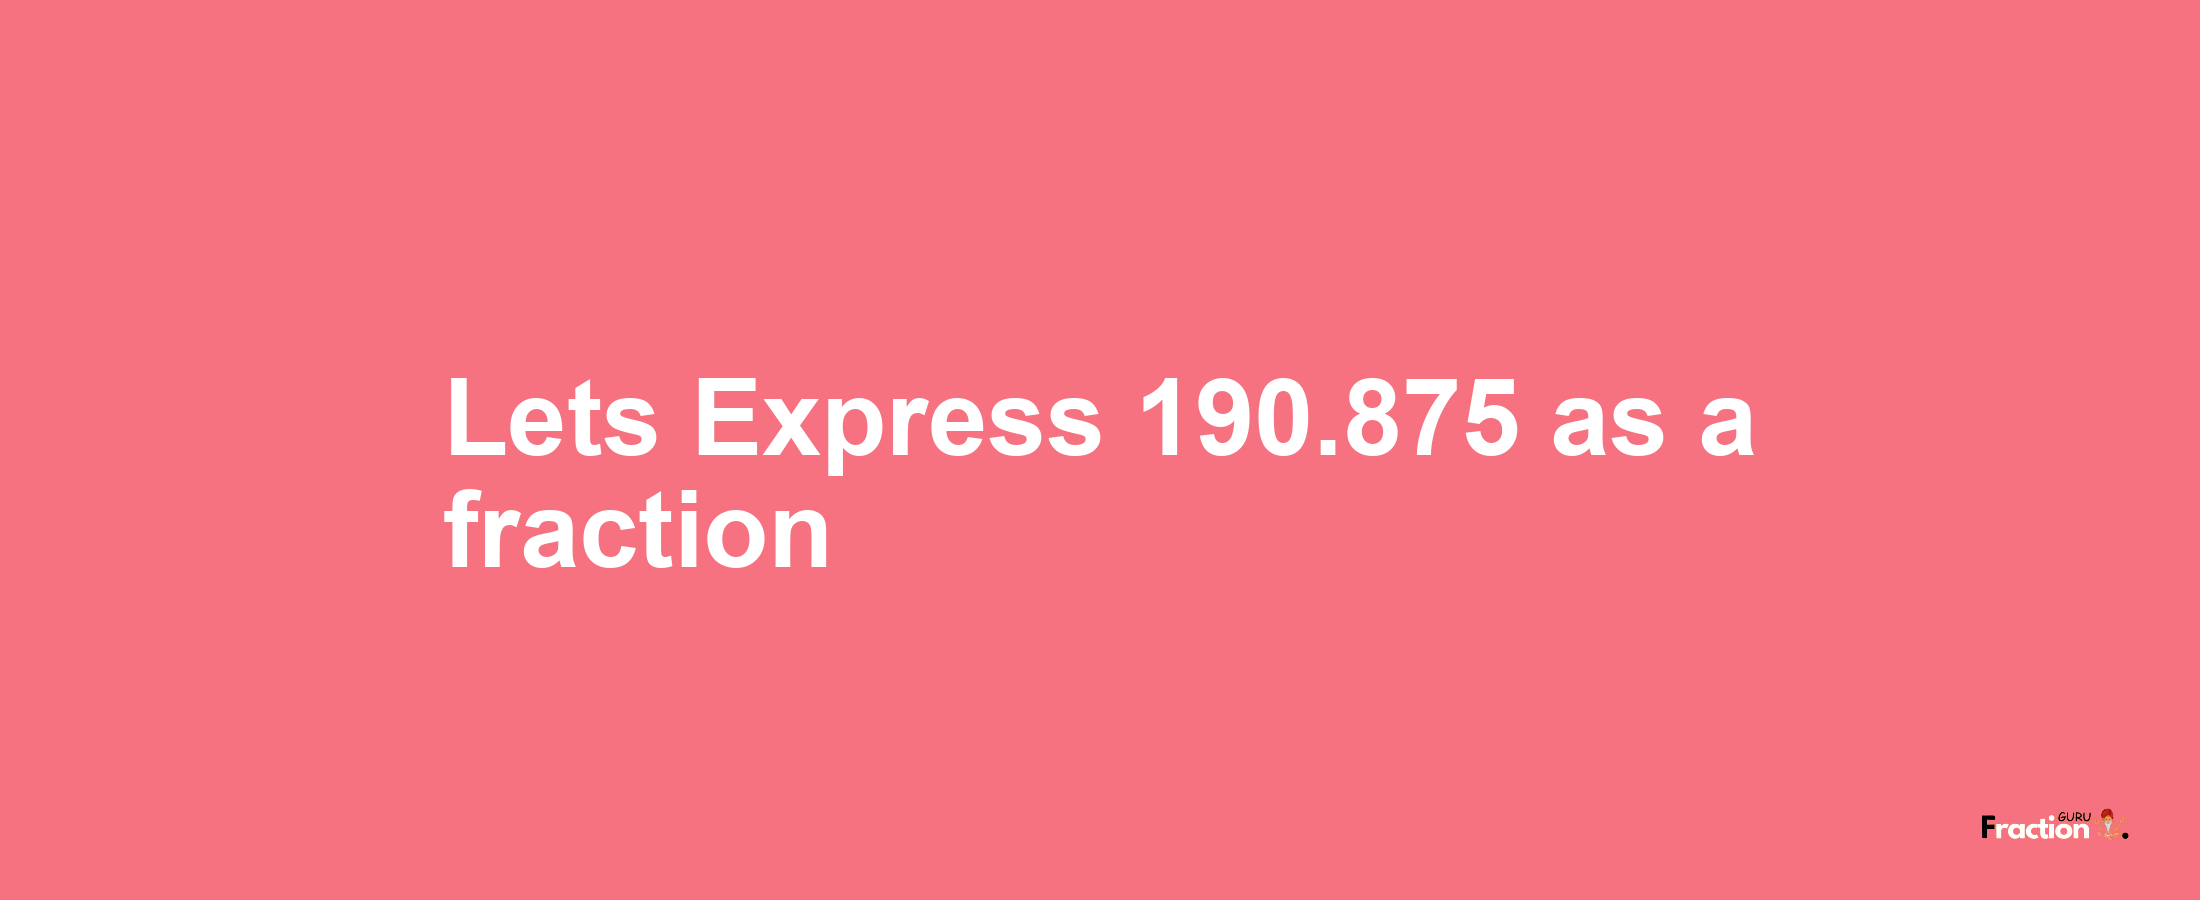 Lets Express 190.875 as afraction